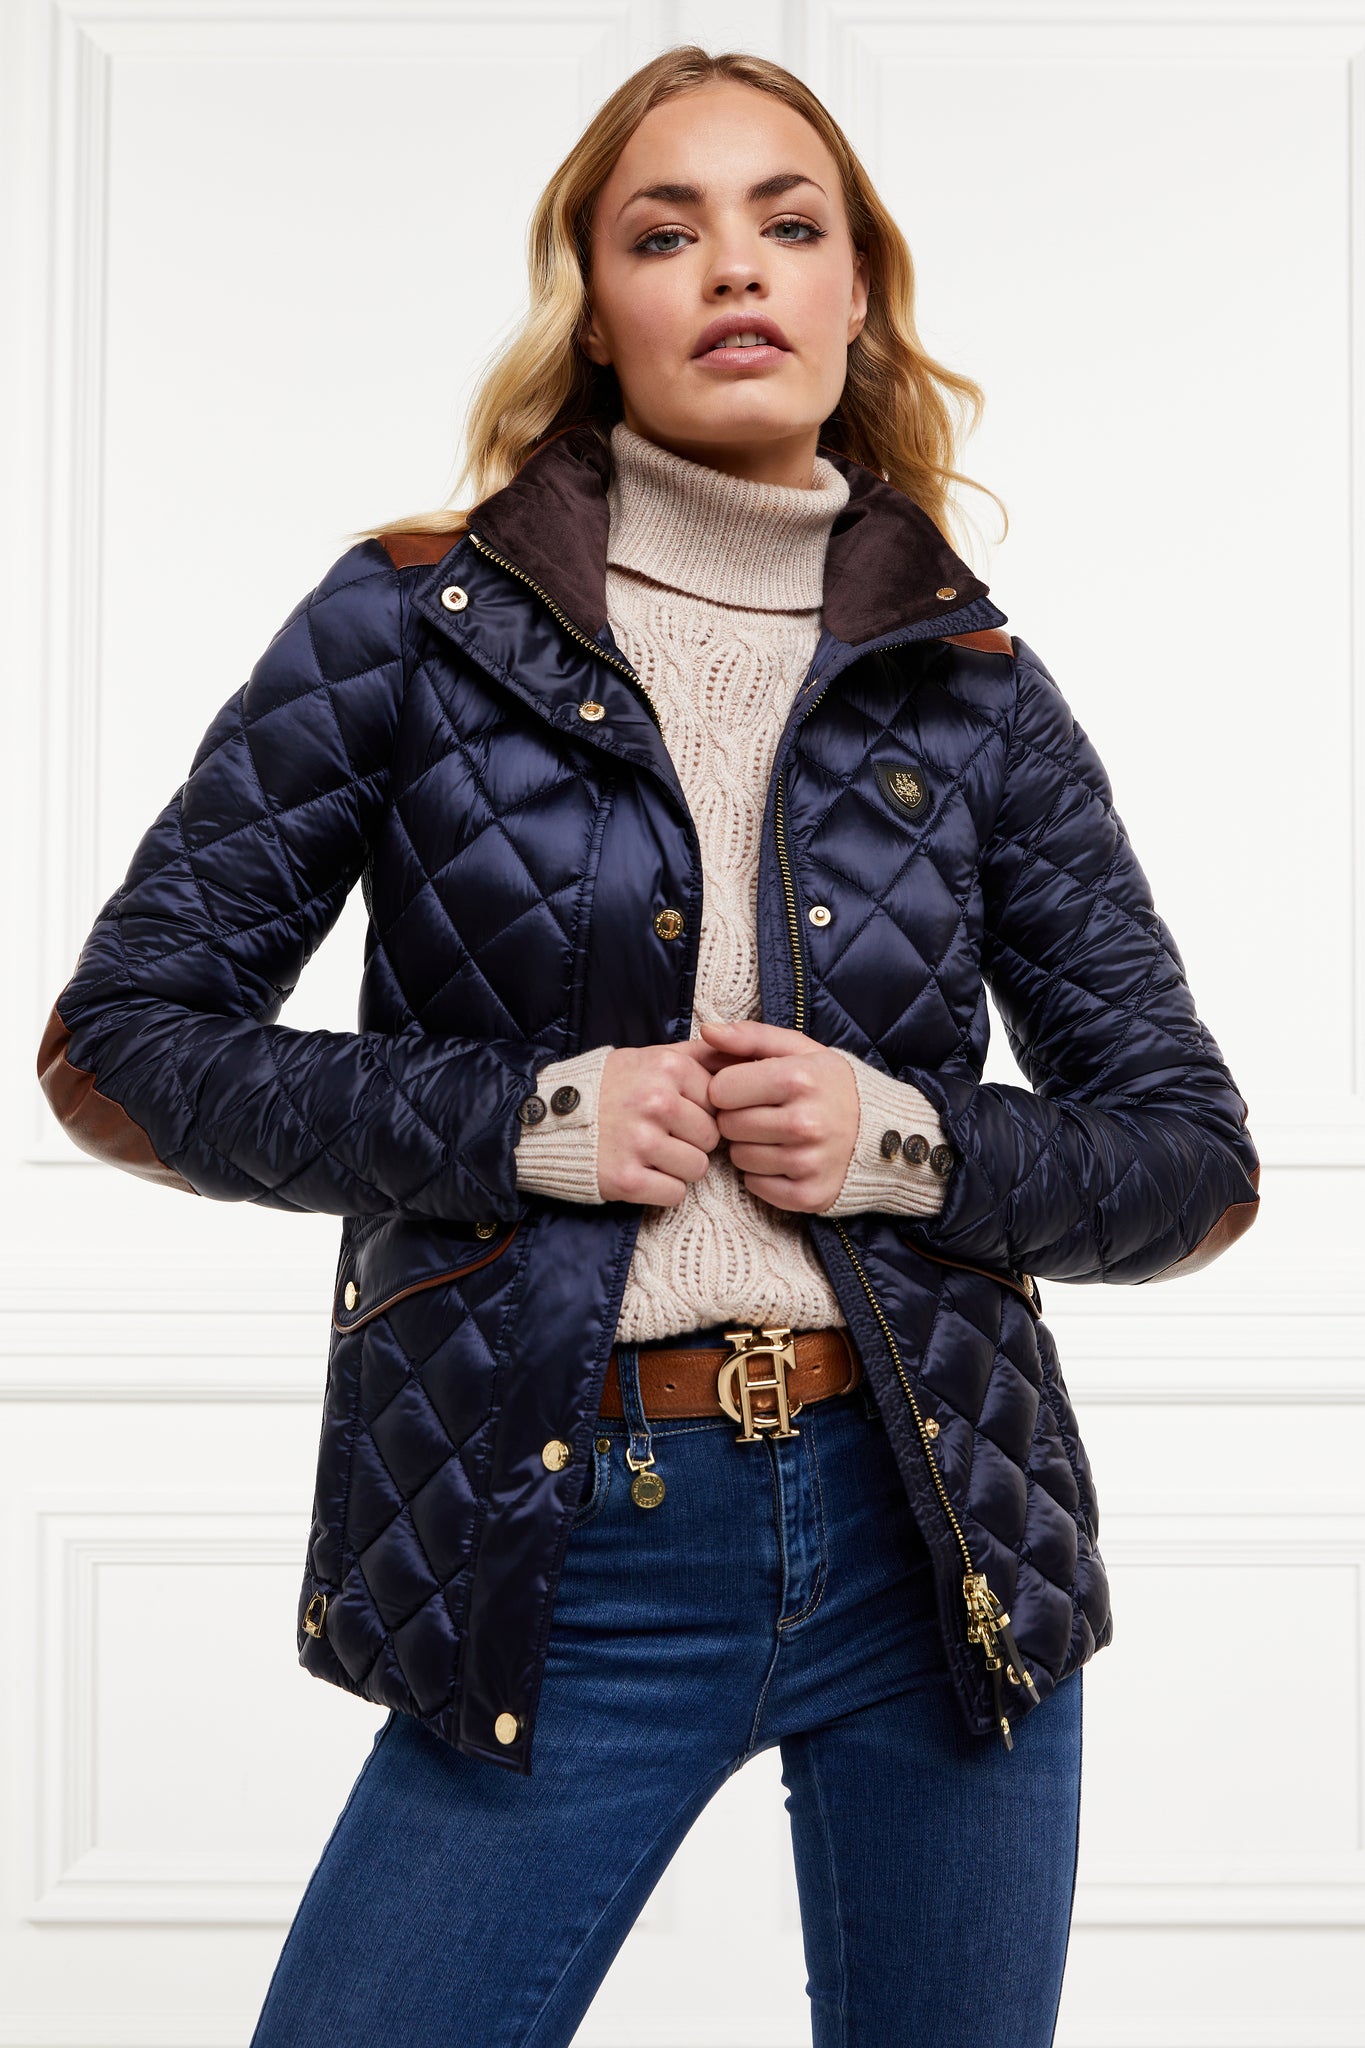 womens diamond quilted navy jacket with contrast tan leather elbow and shoulder pads large front pockets and shirred side panels